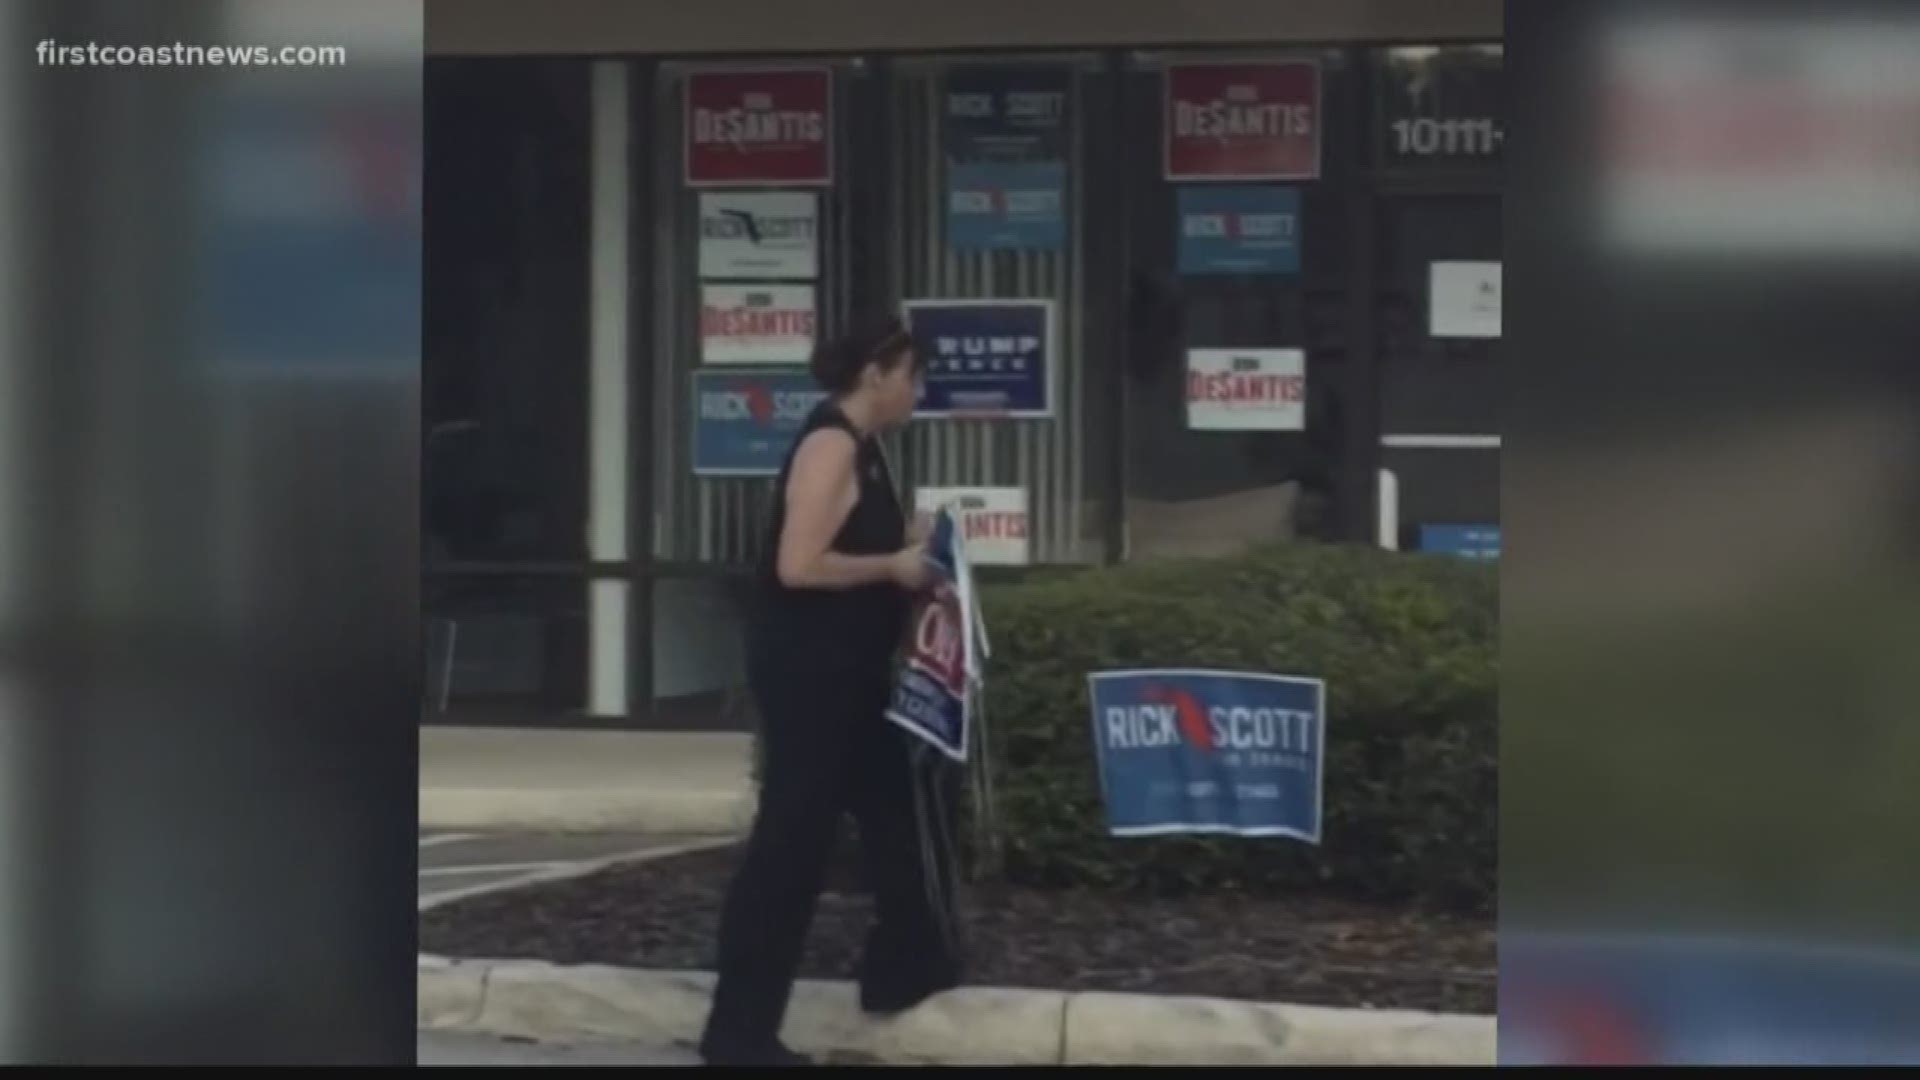 A woman was caught allegedly stealing campaign outside of the GOP headquarters in Jacksonville.